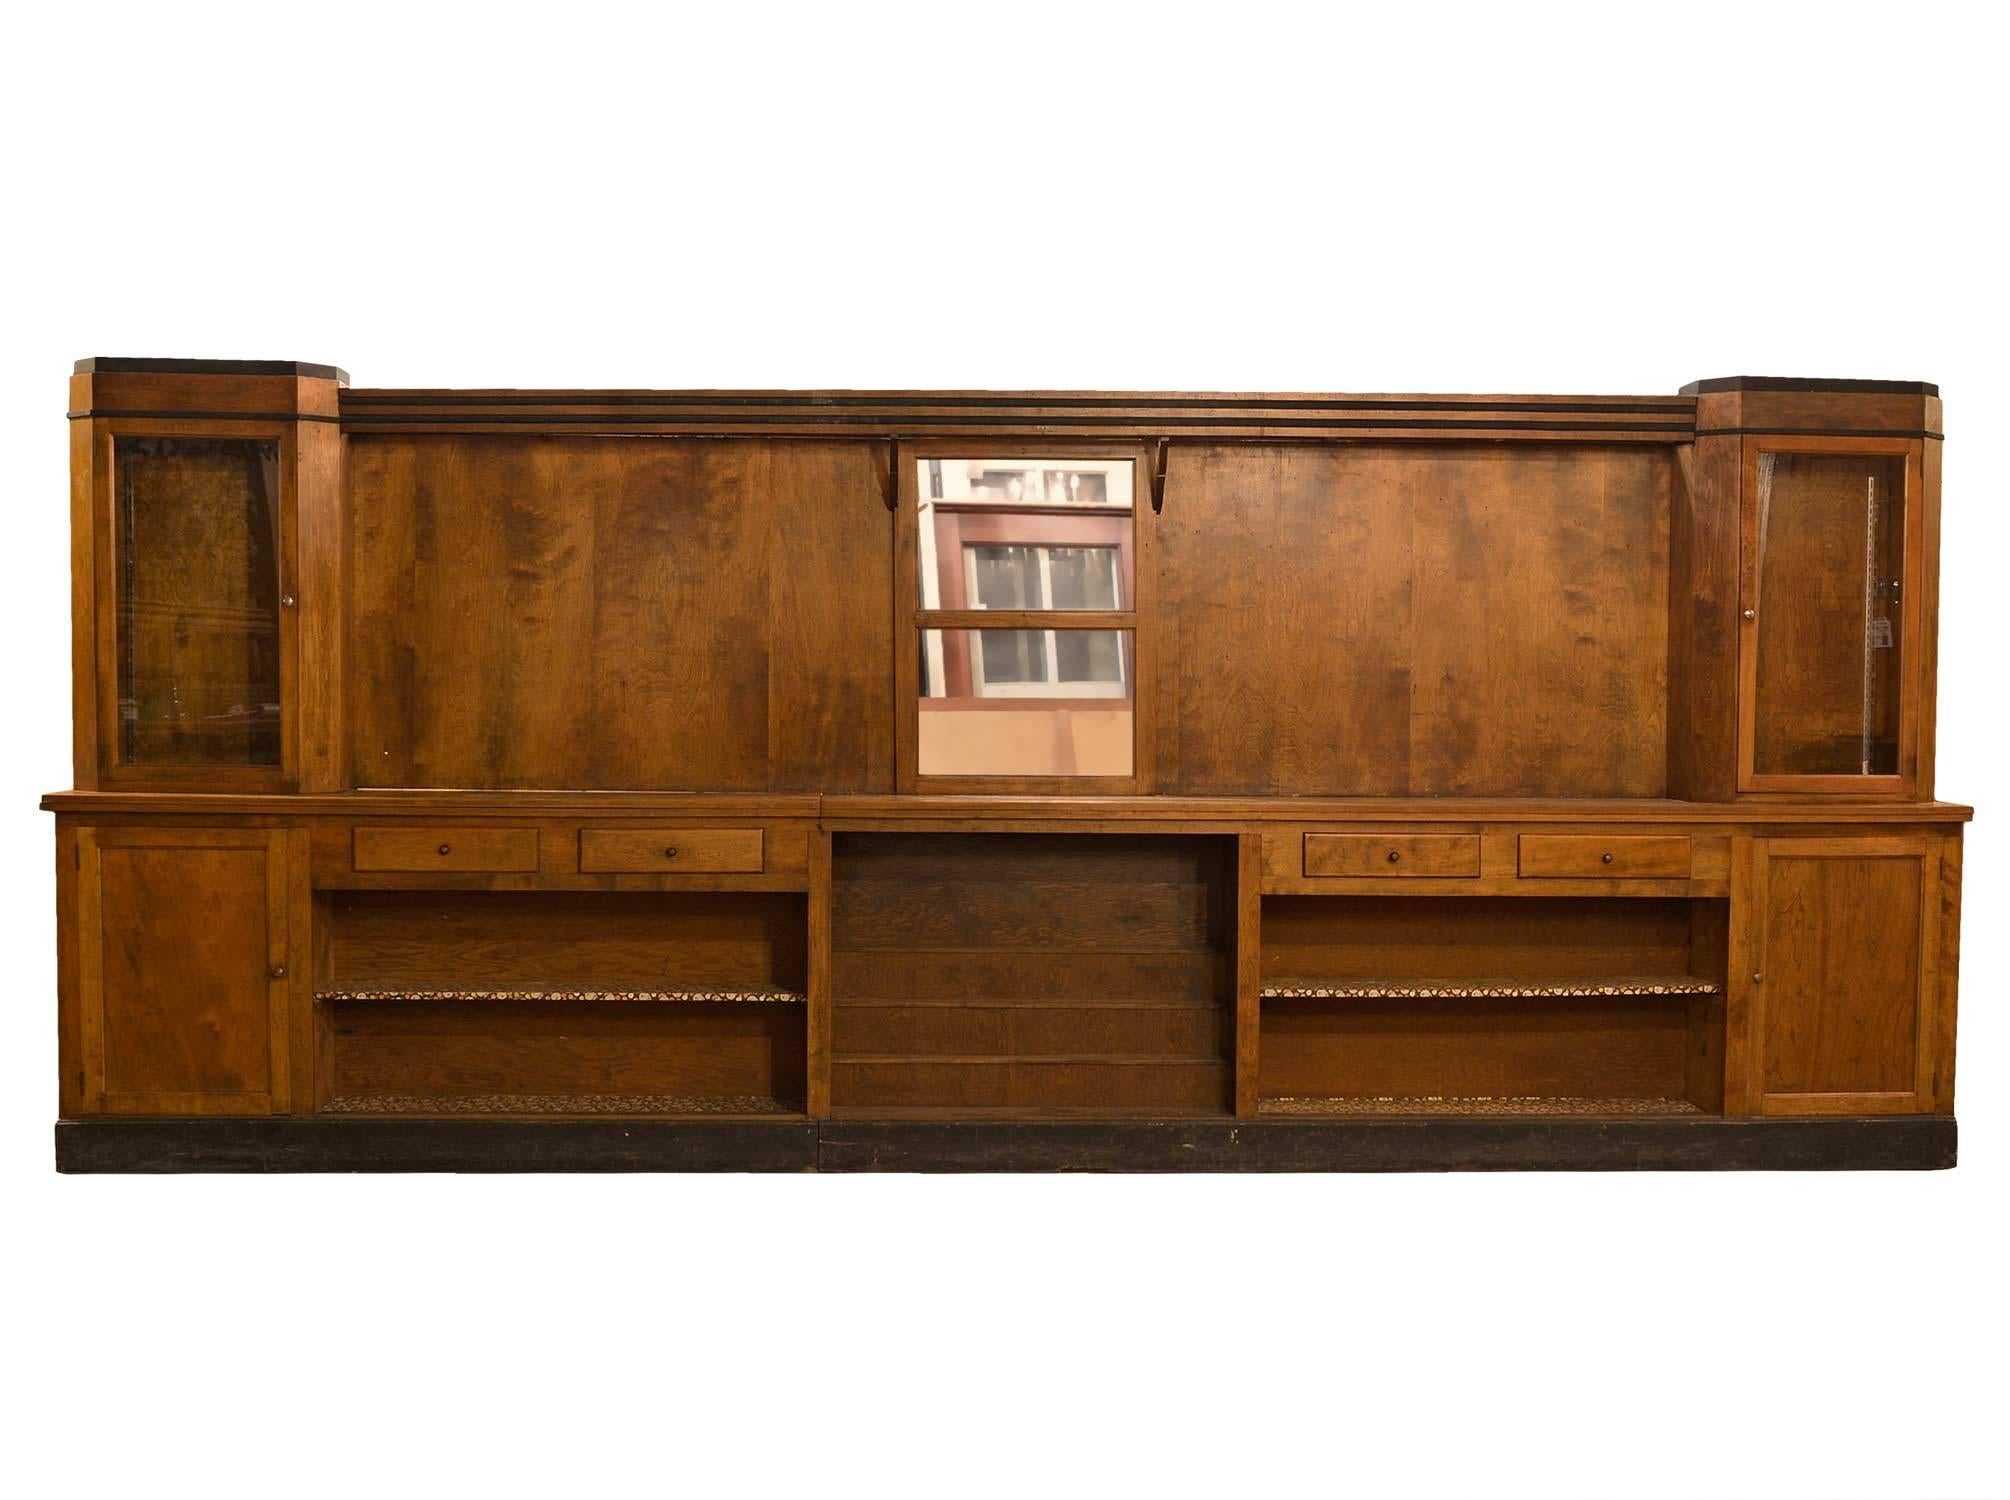 A simplistic Art Deco Brunswick back bar and counter with glass door upper cabinets, lower cupboards, shelf, and multiple drawers.  

Back bar: 216.5" long x 18.25" deep x 92" tall.
Counter: 264.25" long x 21.75" deep x